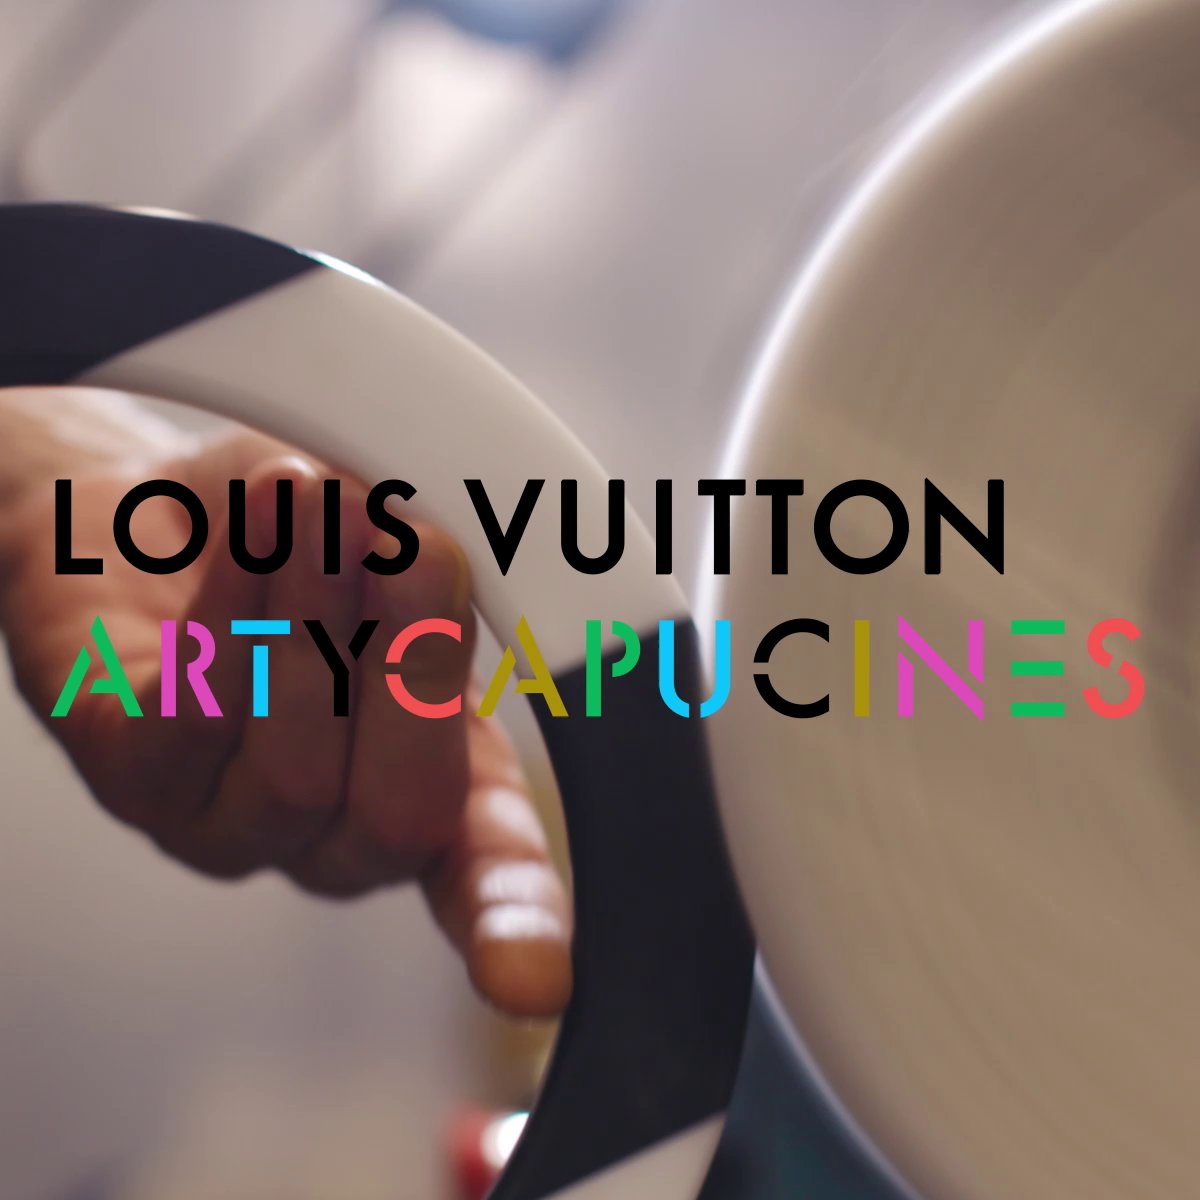 Discover LOUIS VUITTON Artycapucines 2022 Collection